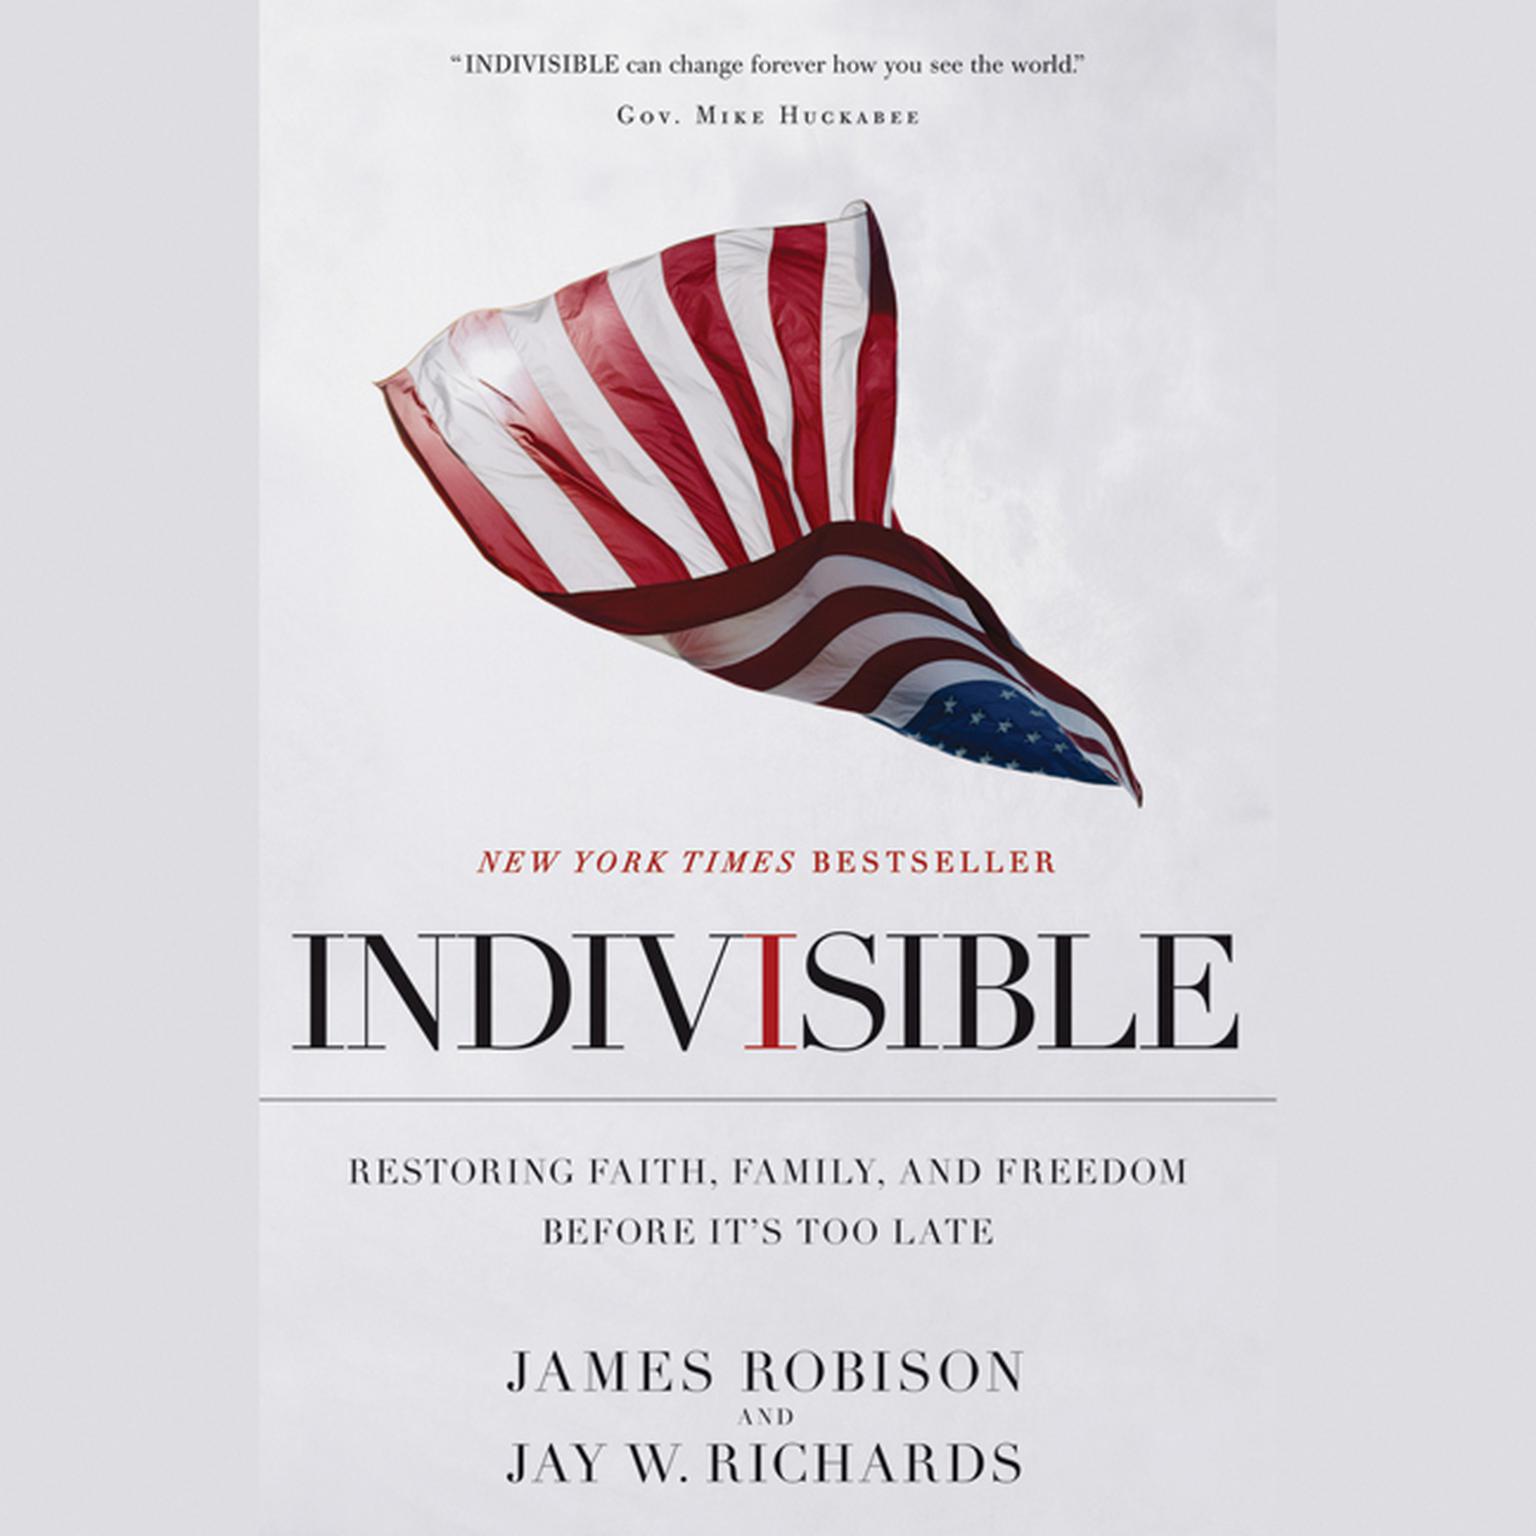 Indivisible: Restoring Faith, Family, and Freedom Before Its Too Late Audiobook, by James Robison